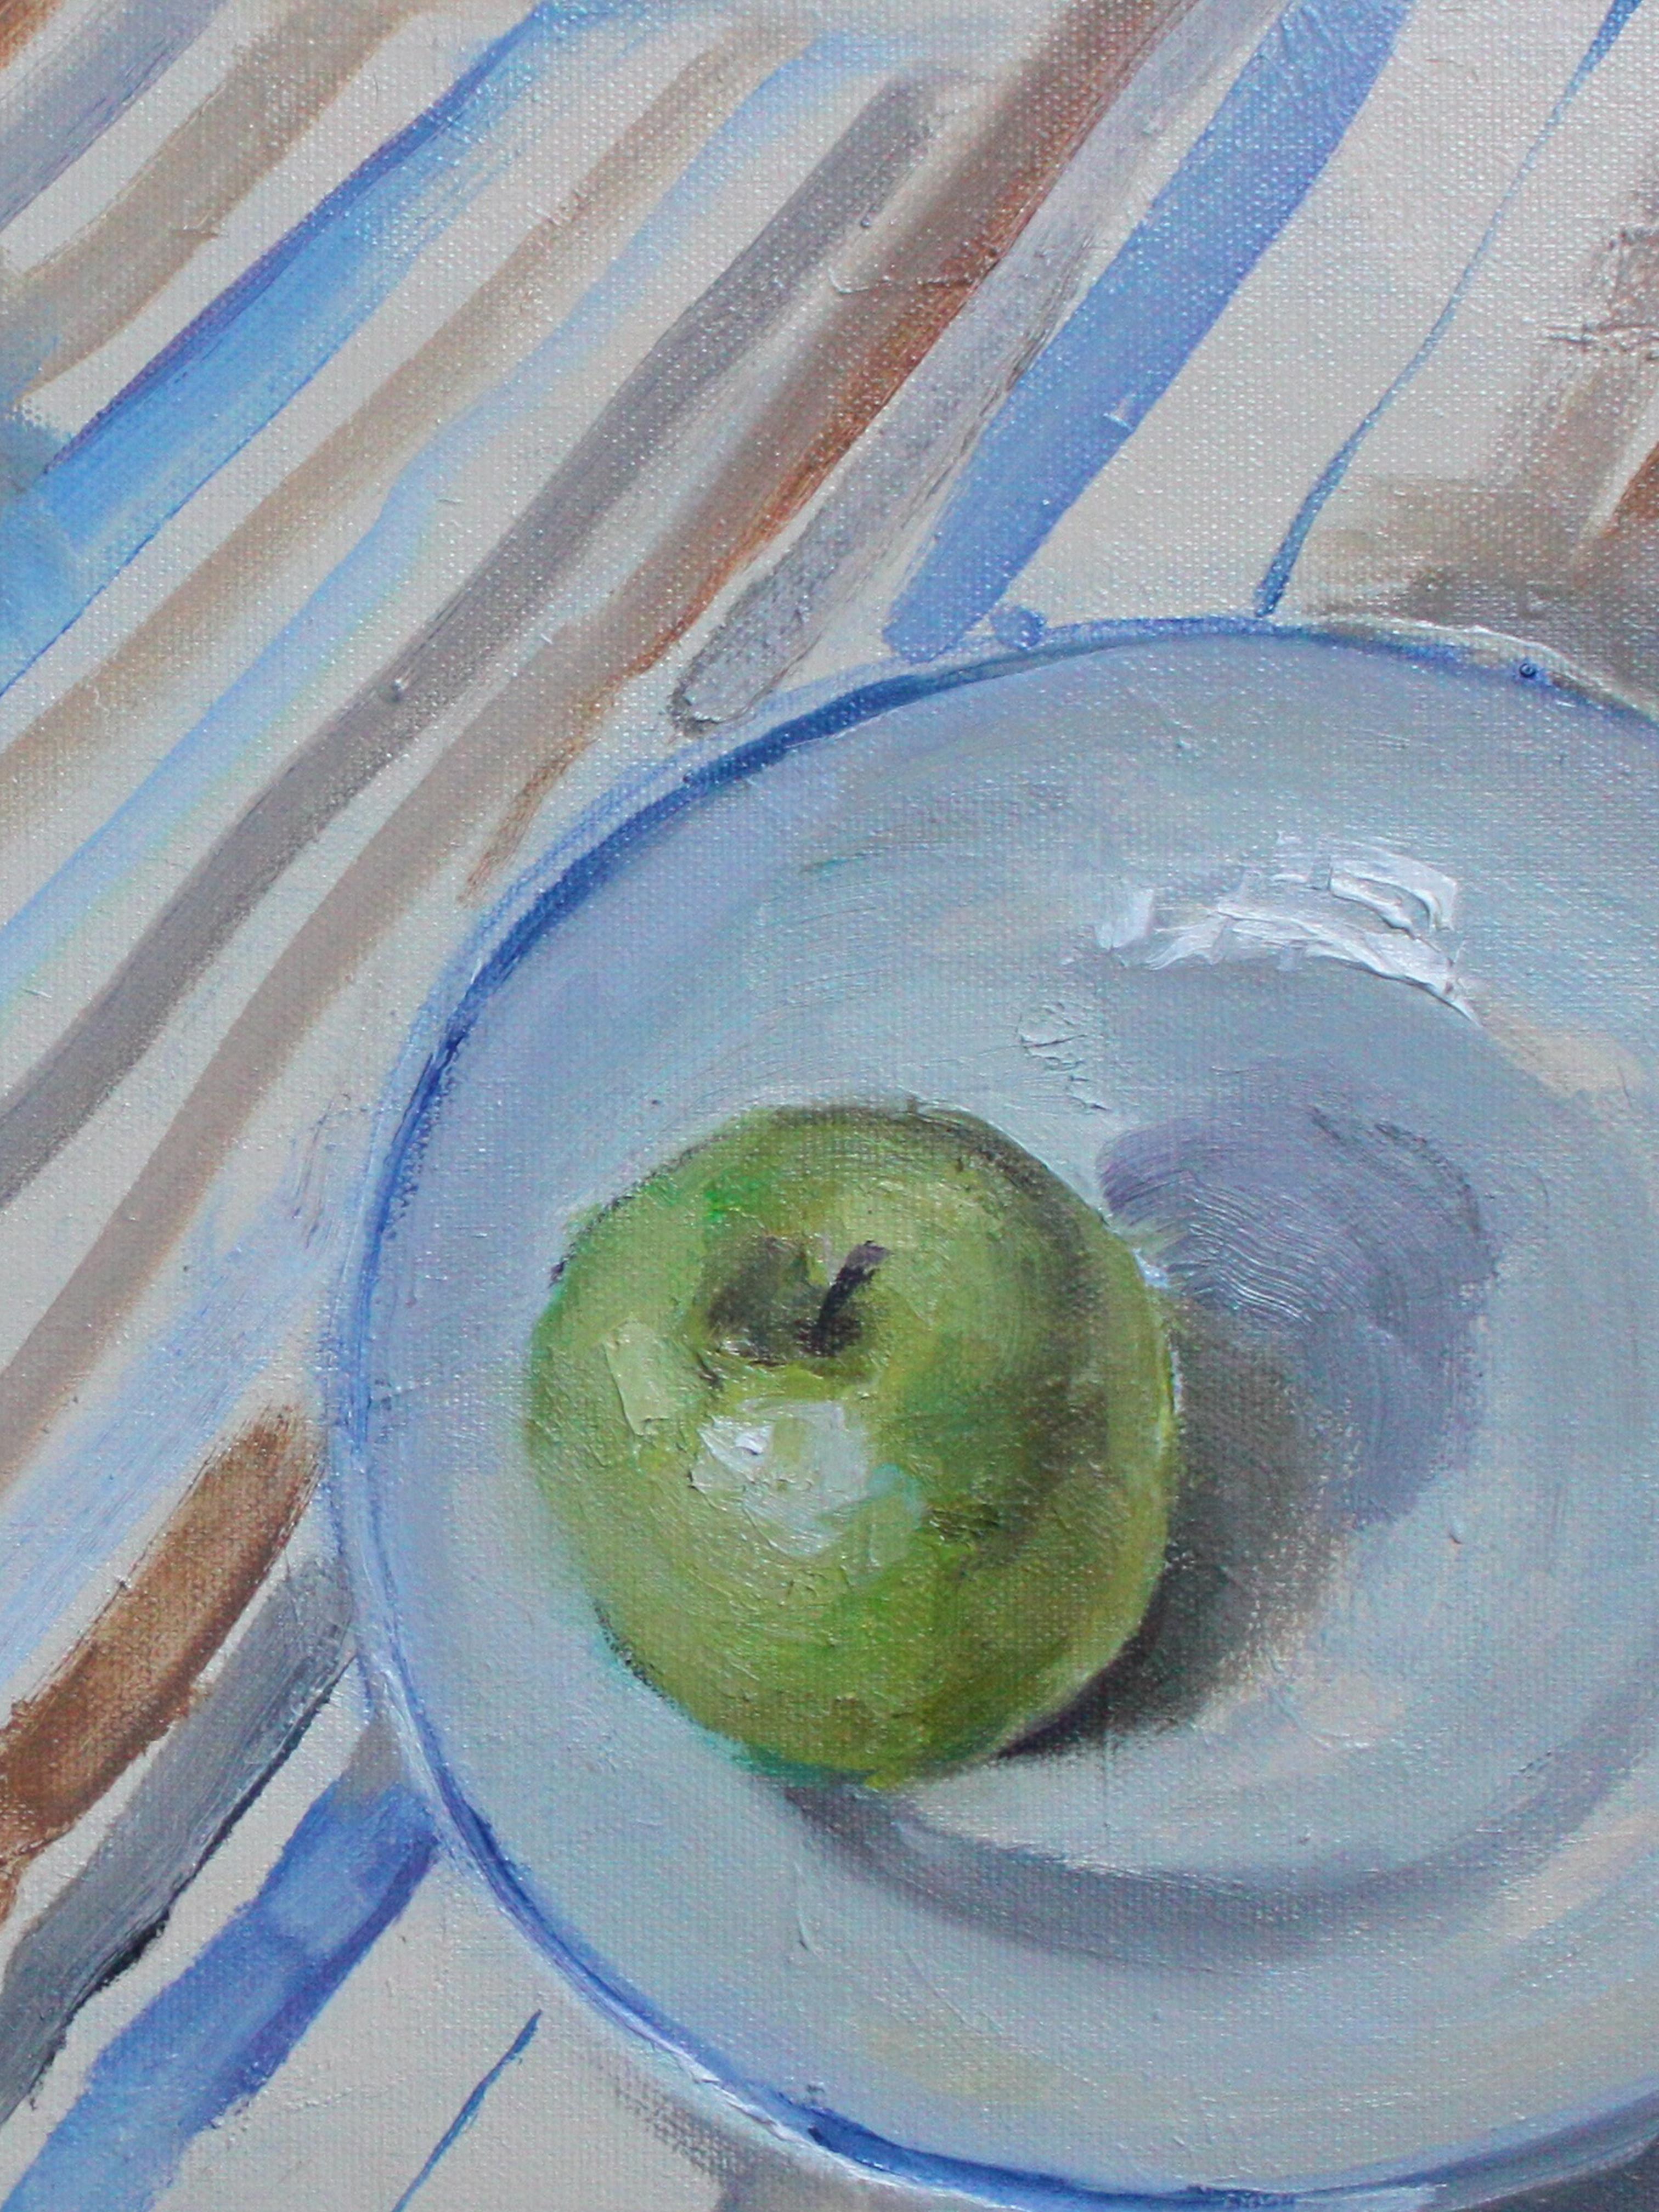 Still Life With an Apple - 21st Century Contemporary Impressionist Oil Painting - Gray Still-Life Painting by Valeria Privalikhina